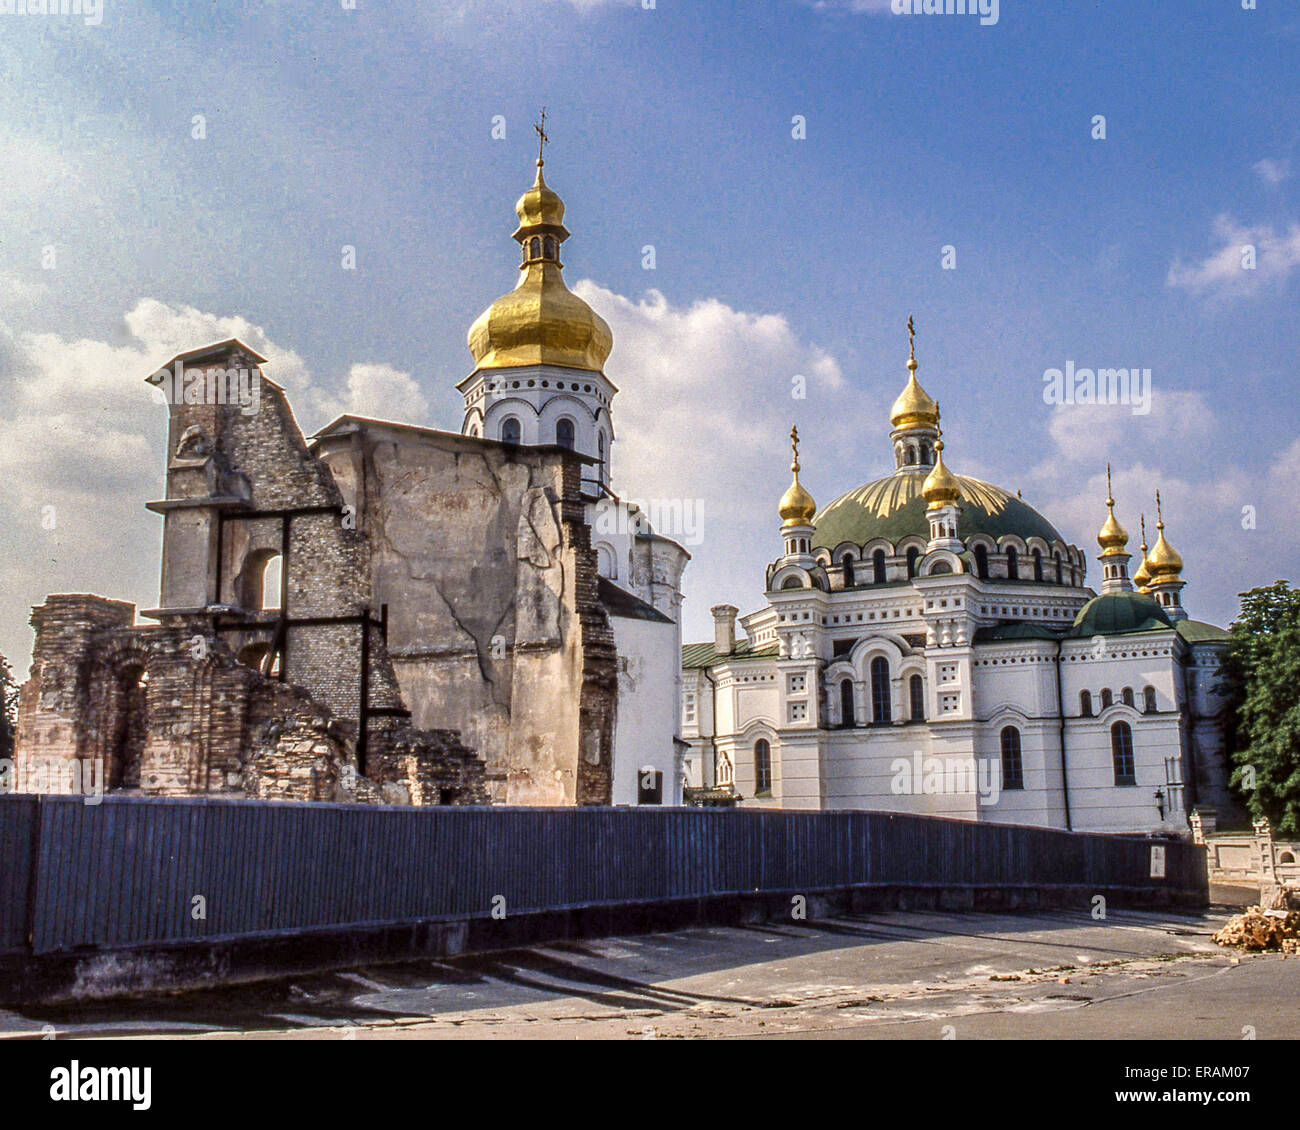 June 13, 1989 - Kiev, Ukraine - The ruins of the original Dormition Cathedral, Pechersk Lavras oldest edifice dating to the 11th century, almost completely destroyed in WW II (since restored and rebuilt). At right is the Refectory Church of Saint Anthony and Theodosius and adjoining refectory where monks had their meals. Founded in 1051, on the hills of the right bank of the Dnieper River, in Kiev, Ukraine, and also known as the Kiev Monastery of the Caves, Pechersk Lavra is the preeminent center of Eastern Orthodox Christianity and part of a UNESCO World Heritage Site that attracts pilgrims a Stock Photo